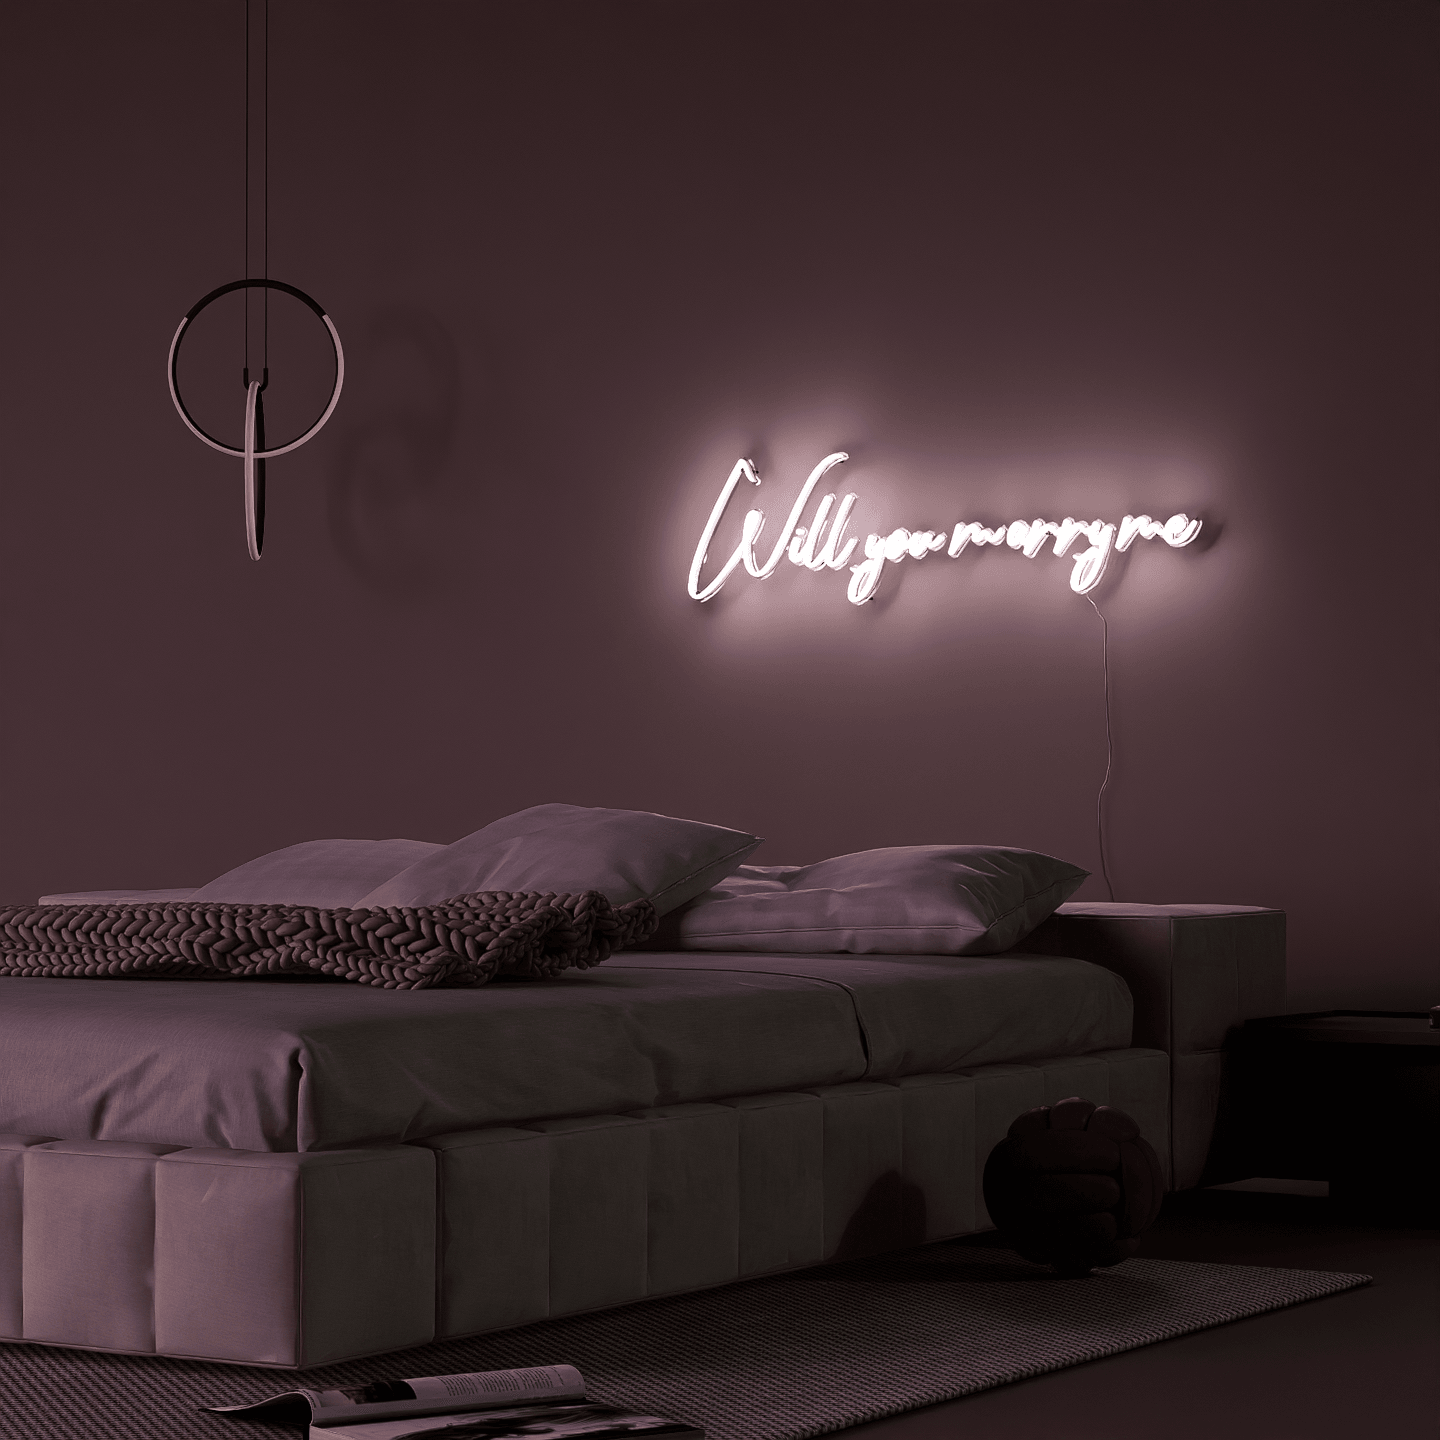 oblique-angle-shot-of-lit-white-neon-lights-hanging-on-the-wall-will-you-marry-me